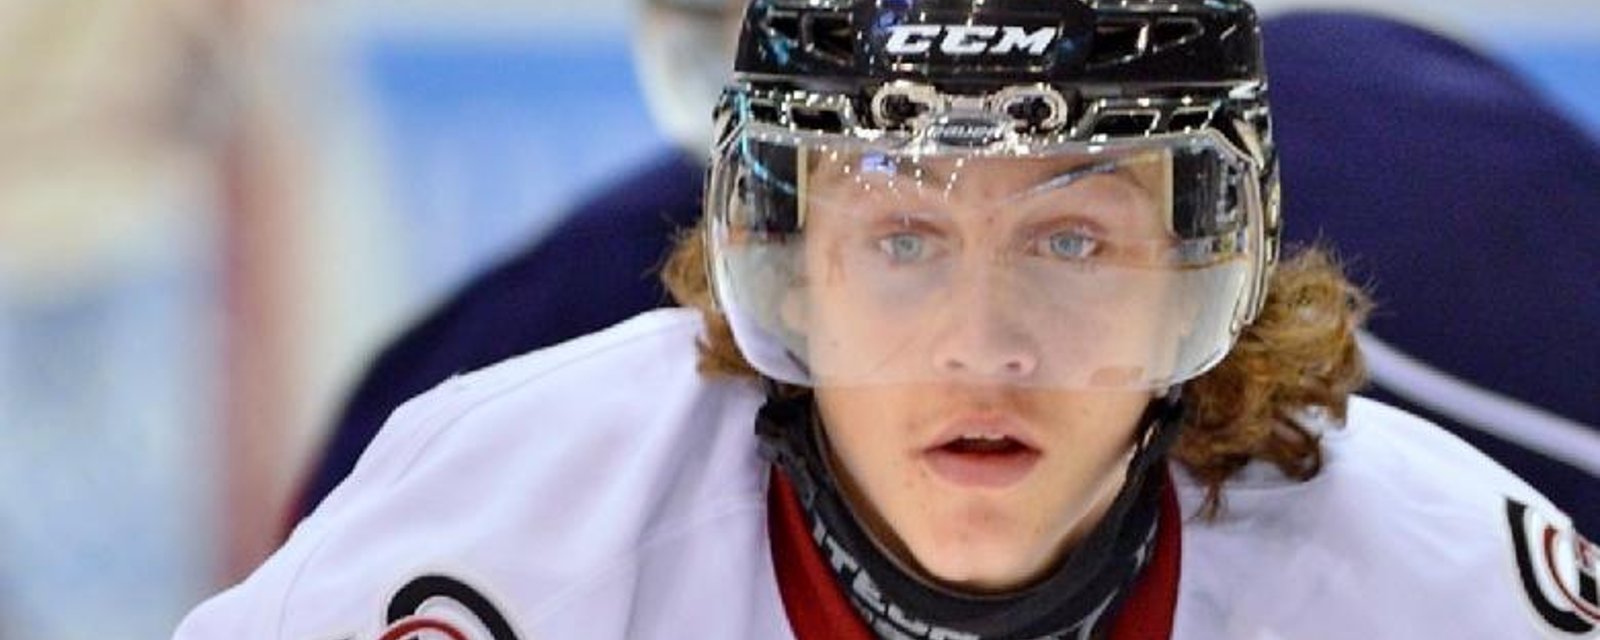 Nephew of legendary power forward has a good chance of cracking NHL roster.